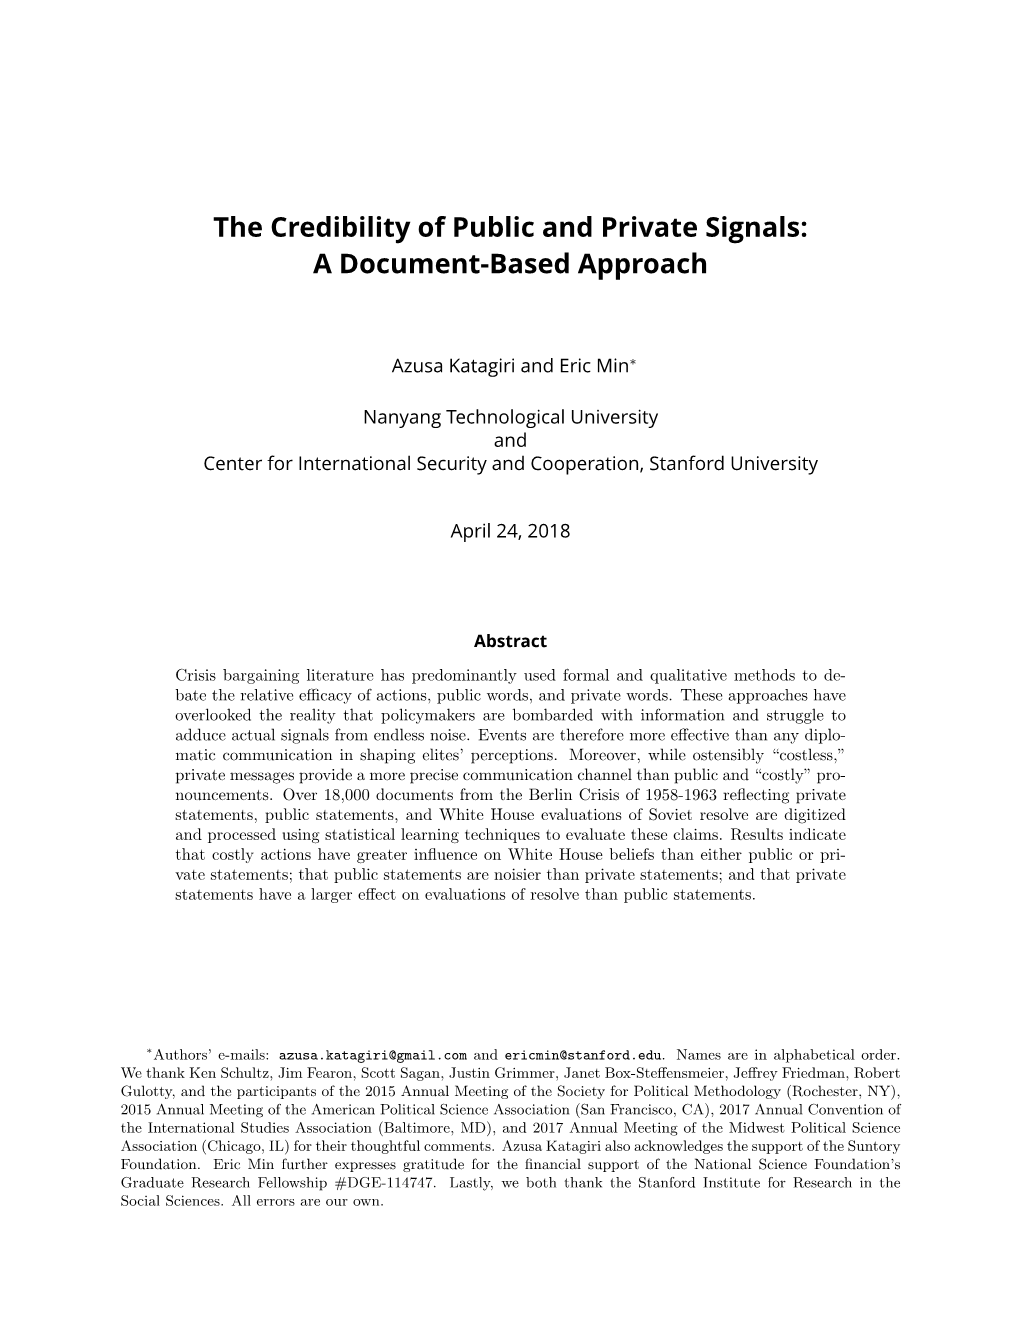 The Credibility of Public and Private Signals: a Document-Based Approach